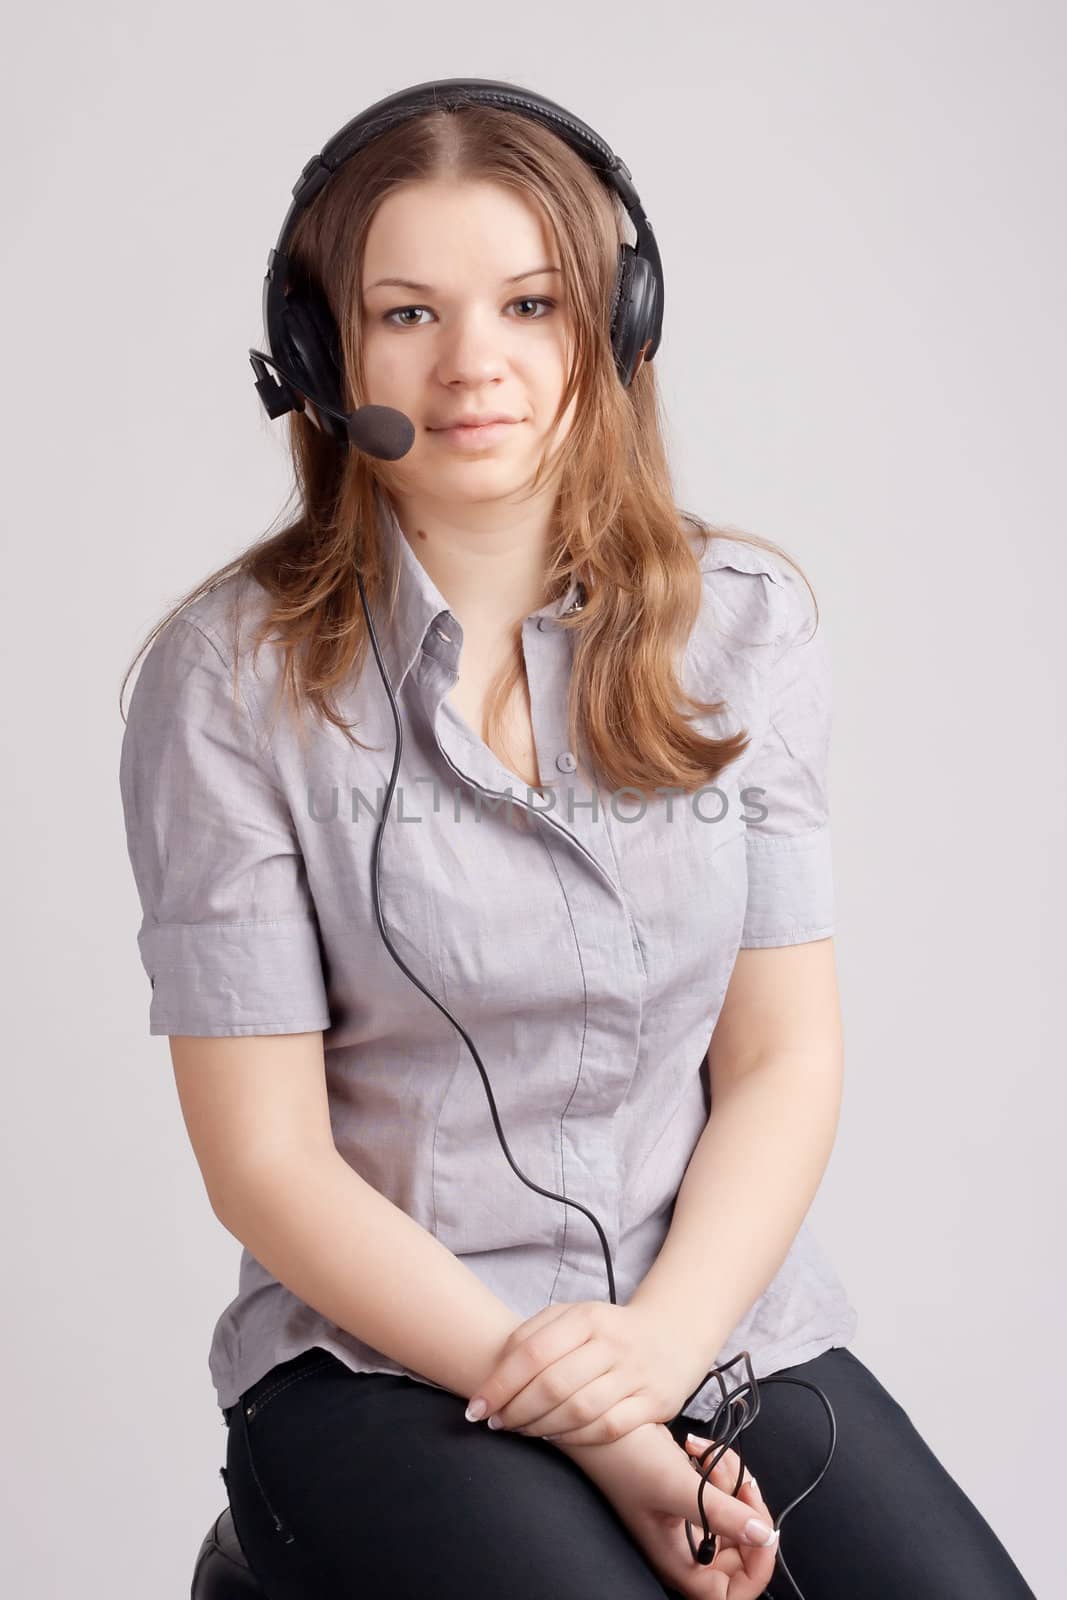 The girl in headphones with microphone